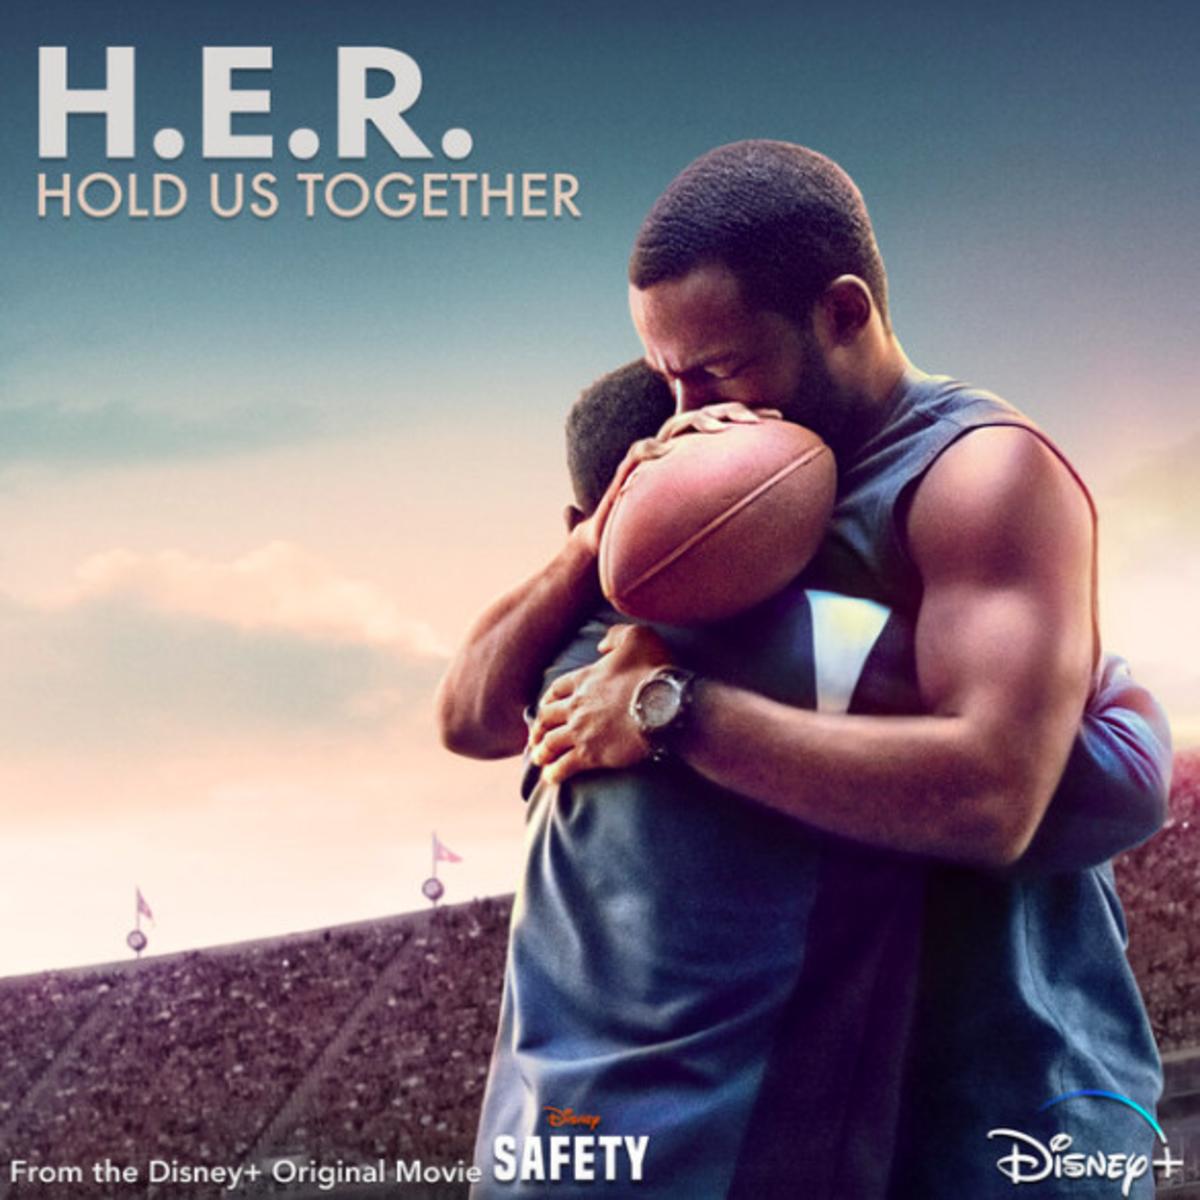 H.E.R. Releases “Hold Us Together”